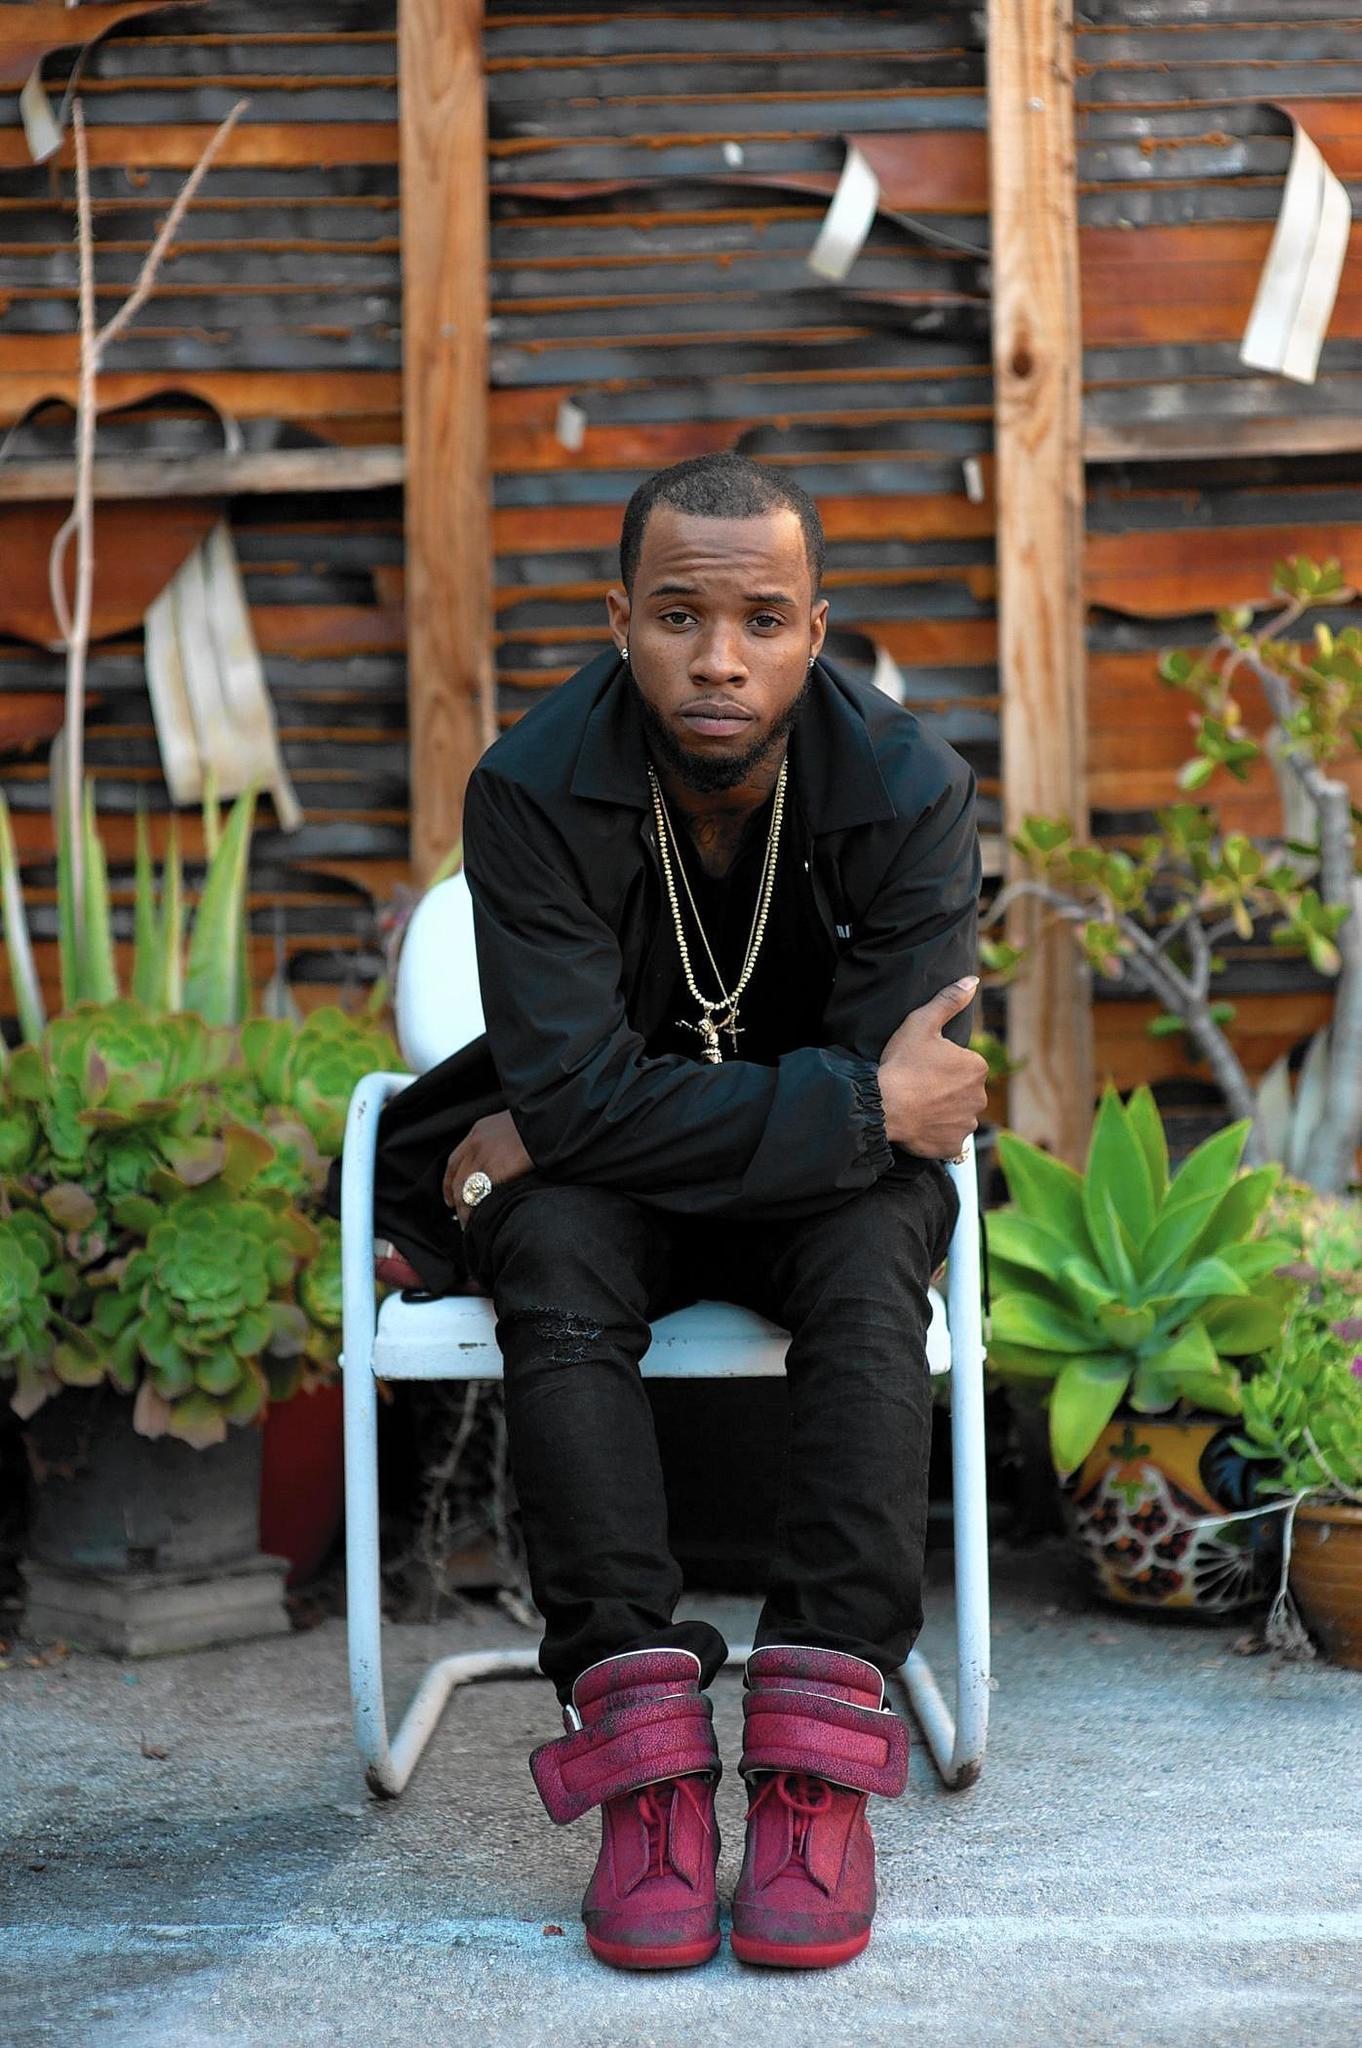 Tory Lanez, coming to Philadelphia, tells story of his life in 'I Told You' - Allentown Morning Call